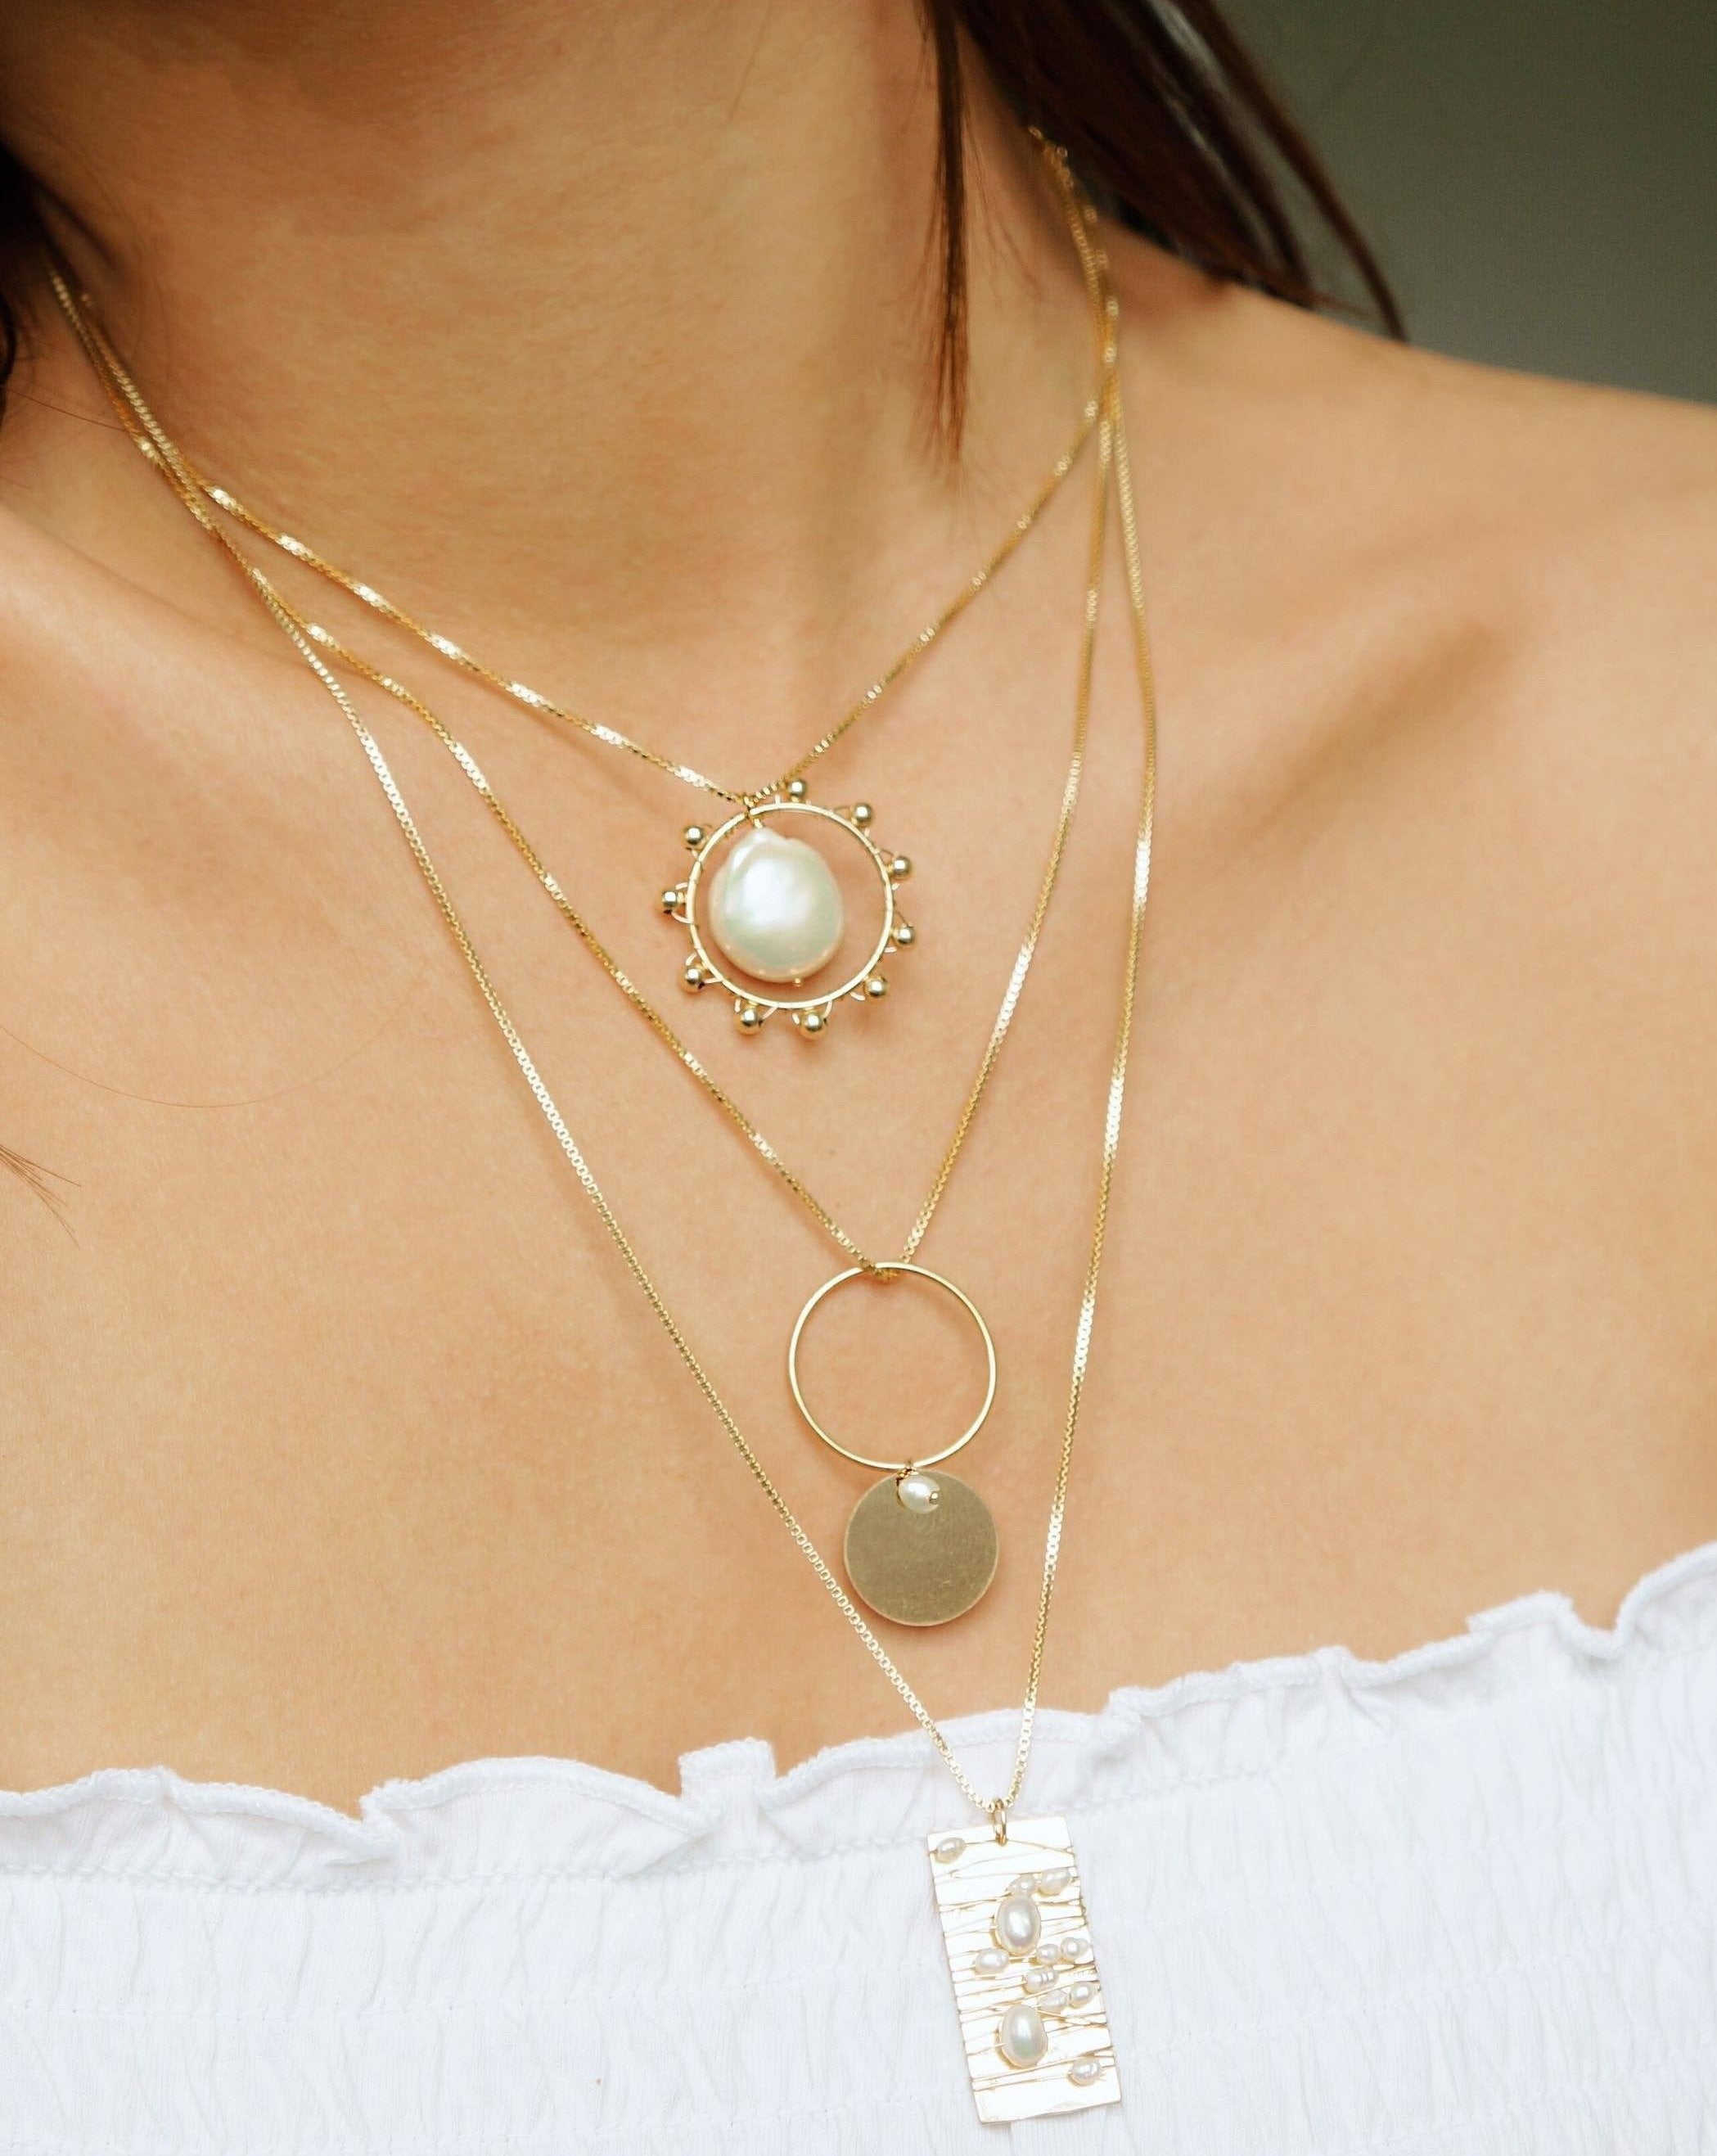 Kuru Necklace by KOZAKH. A 16 to 18 inch adjustable length, 1mm box chain necklace, crafted in 14K Gold Filled, featuring a 20mm x 15mm Baroque Pearl inside a ring embellished with gold beads.